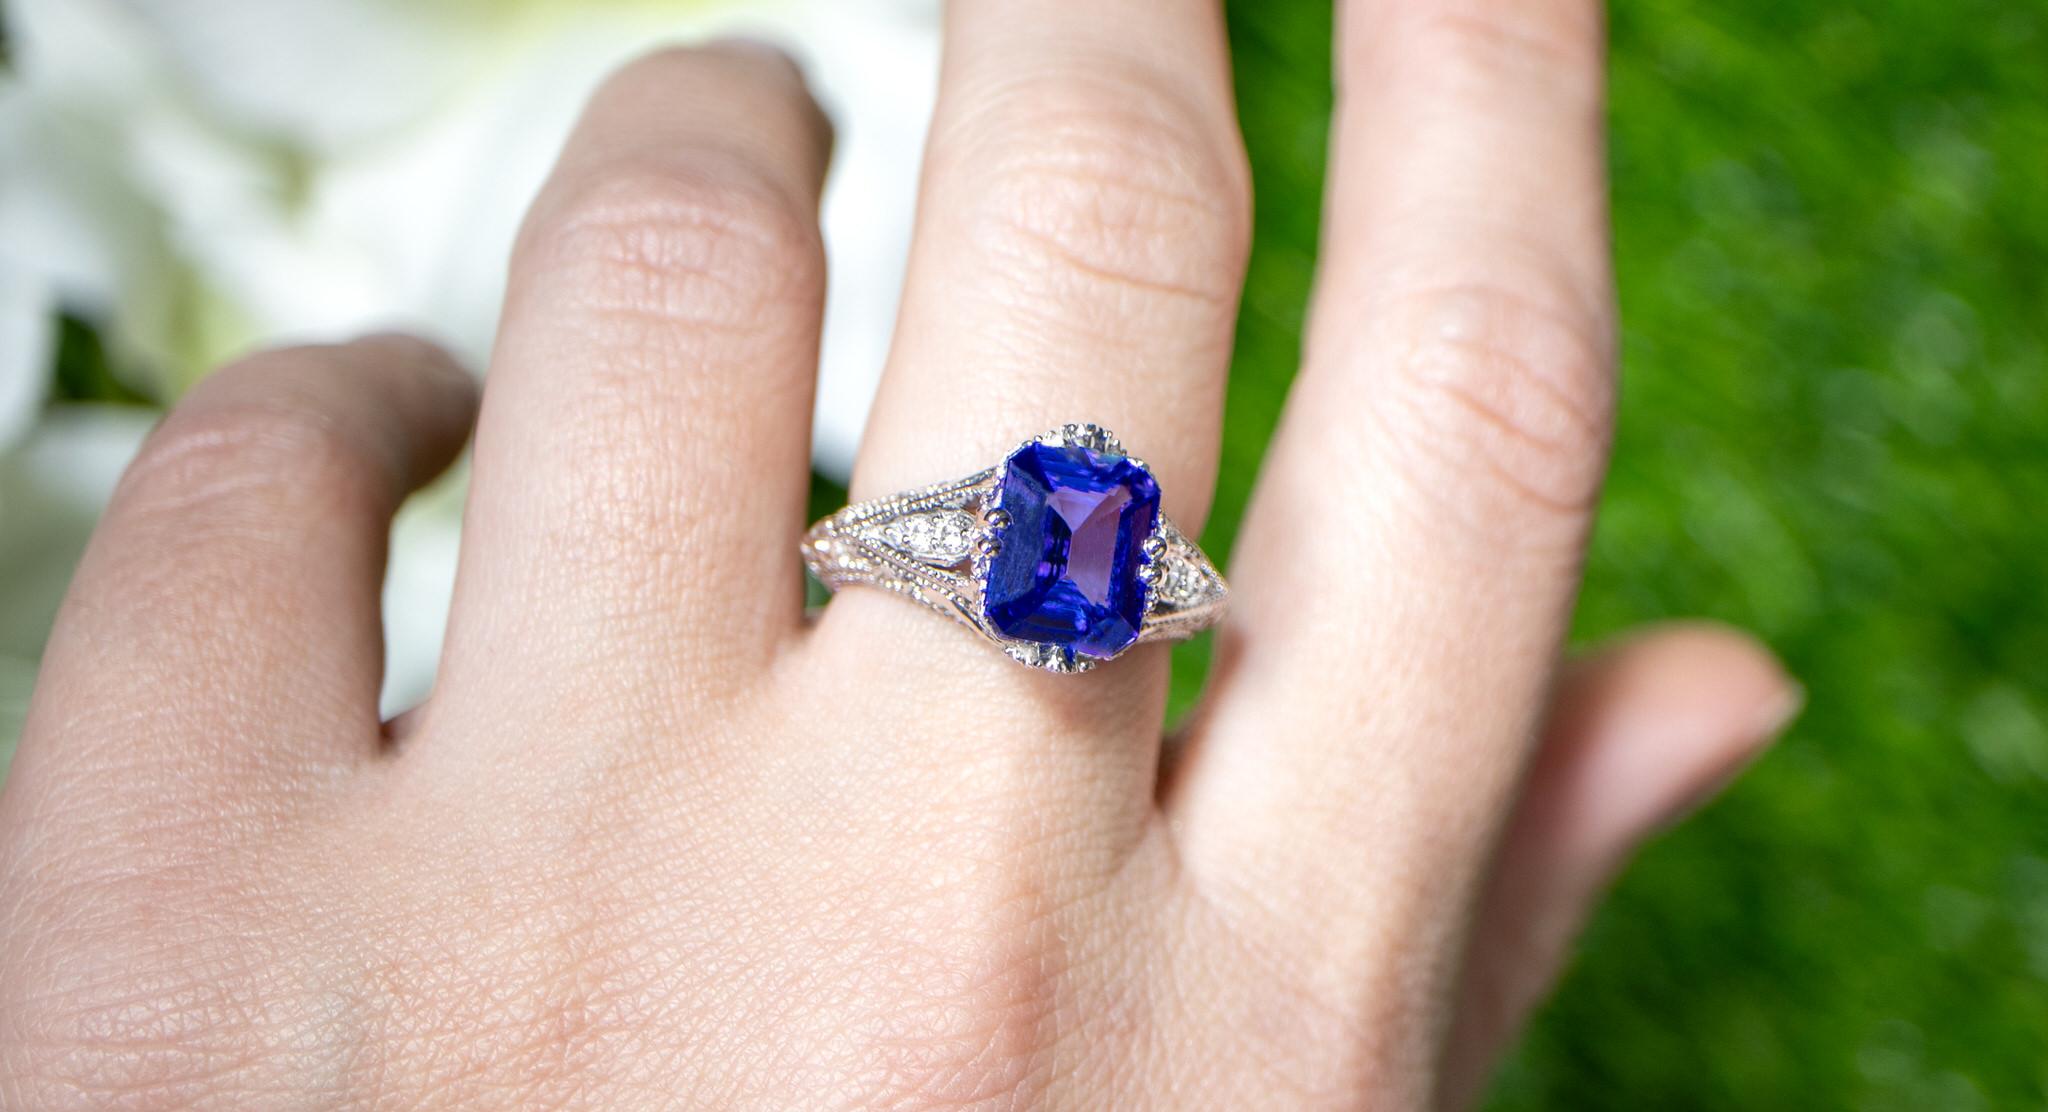 Octagon Cut Tanzanite Ring With Diamond Setting 3.24 Carats 18K Gold For Sale